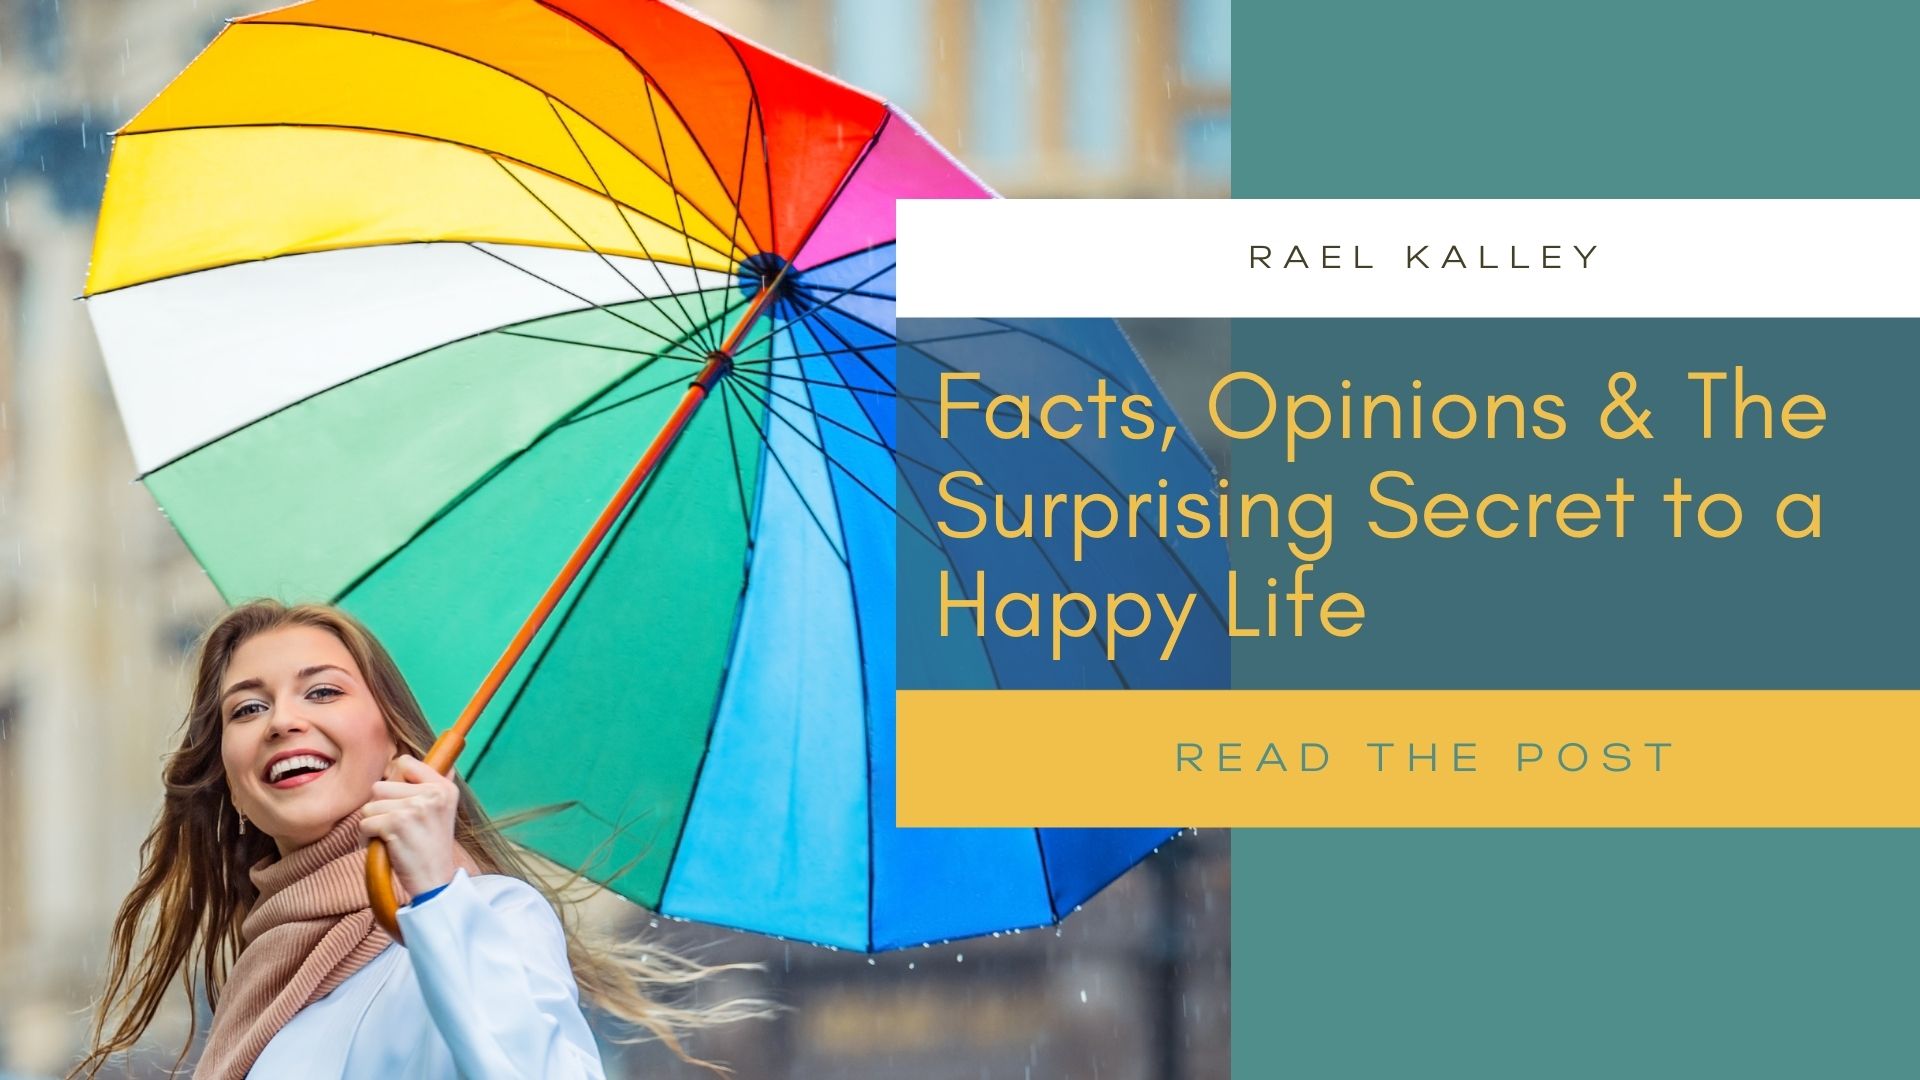 Facts, Opinions and the secret to a happy life...girl with umbrella